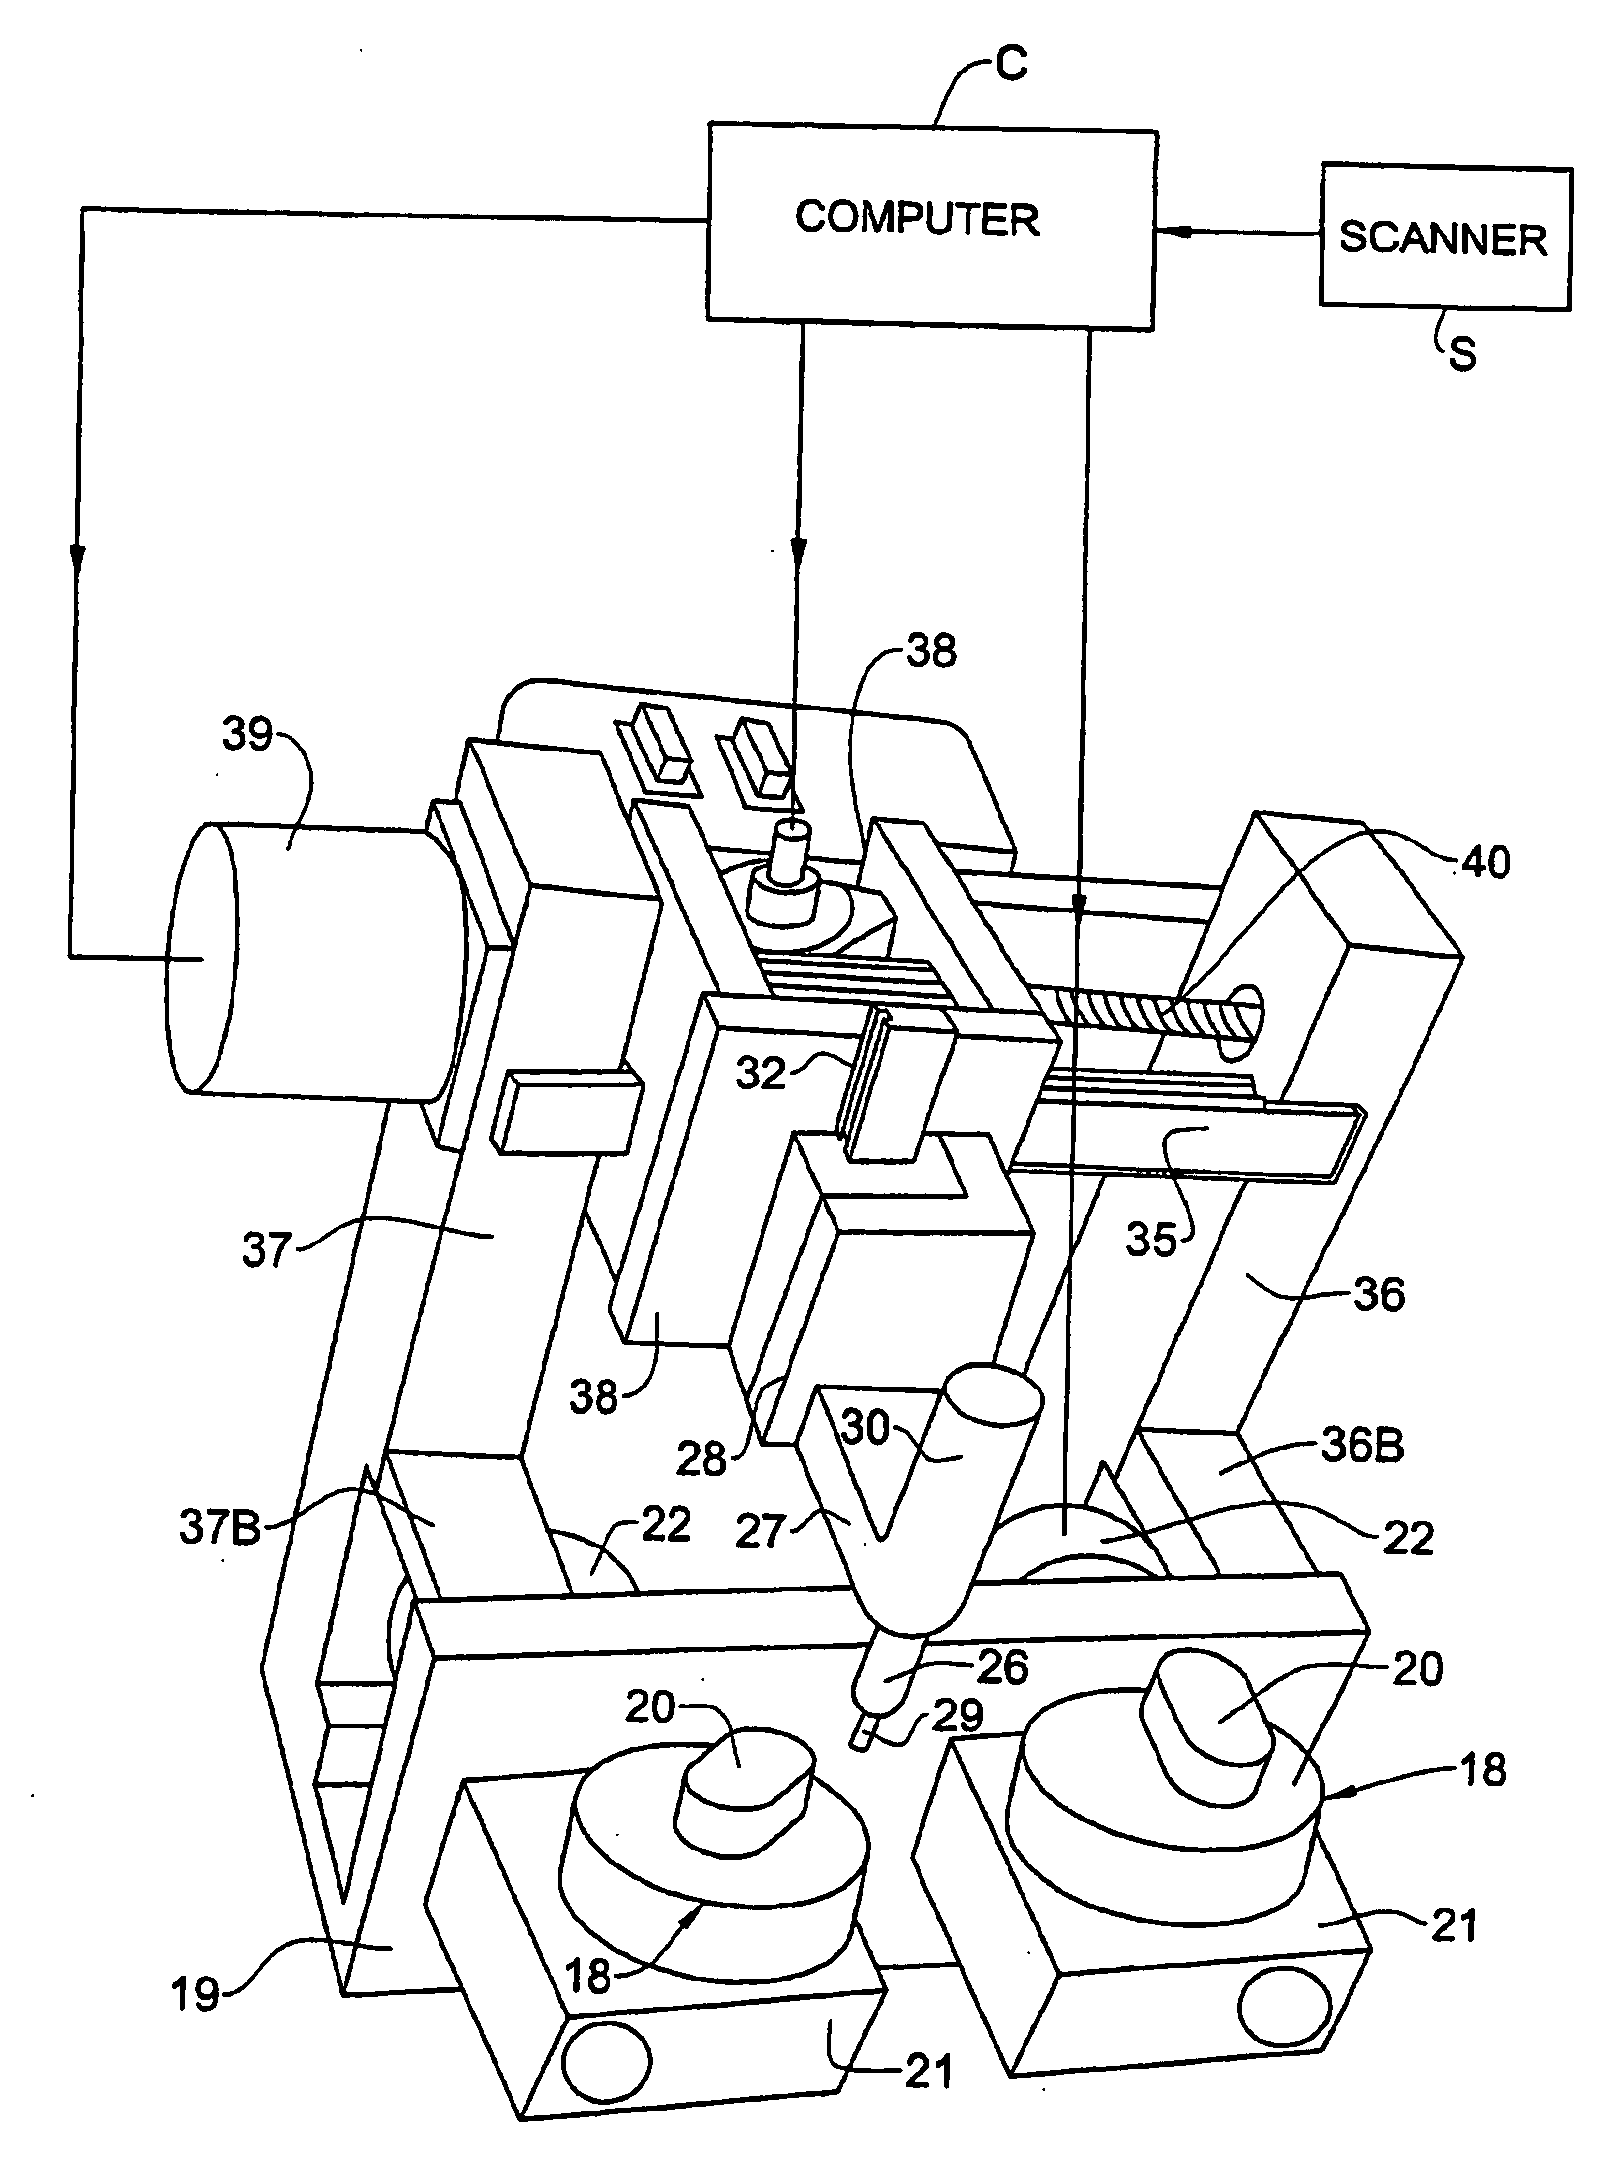 Computer-controlled milling machine for producing lenses for clip-on accessory